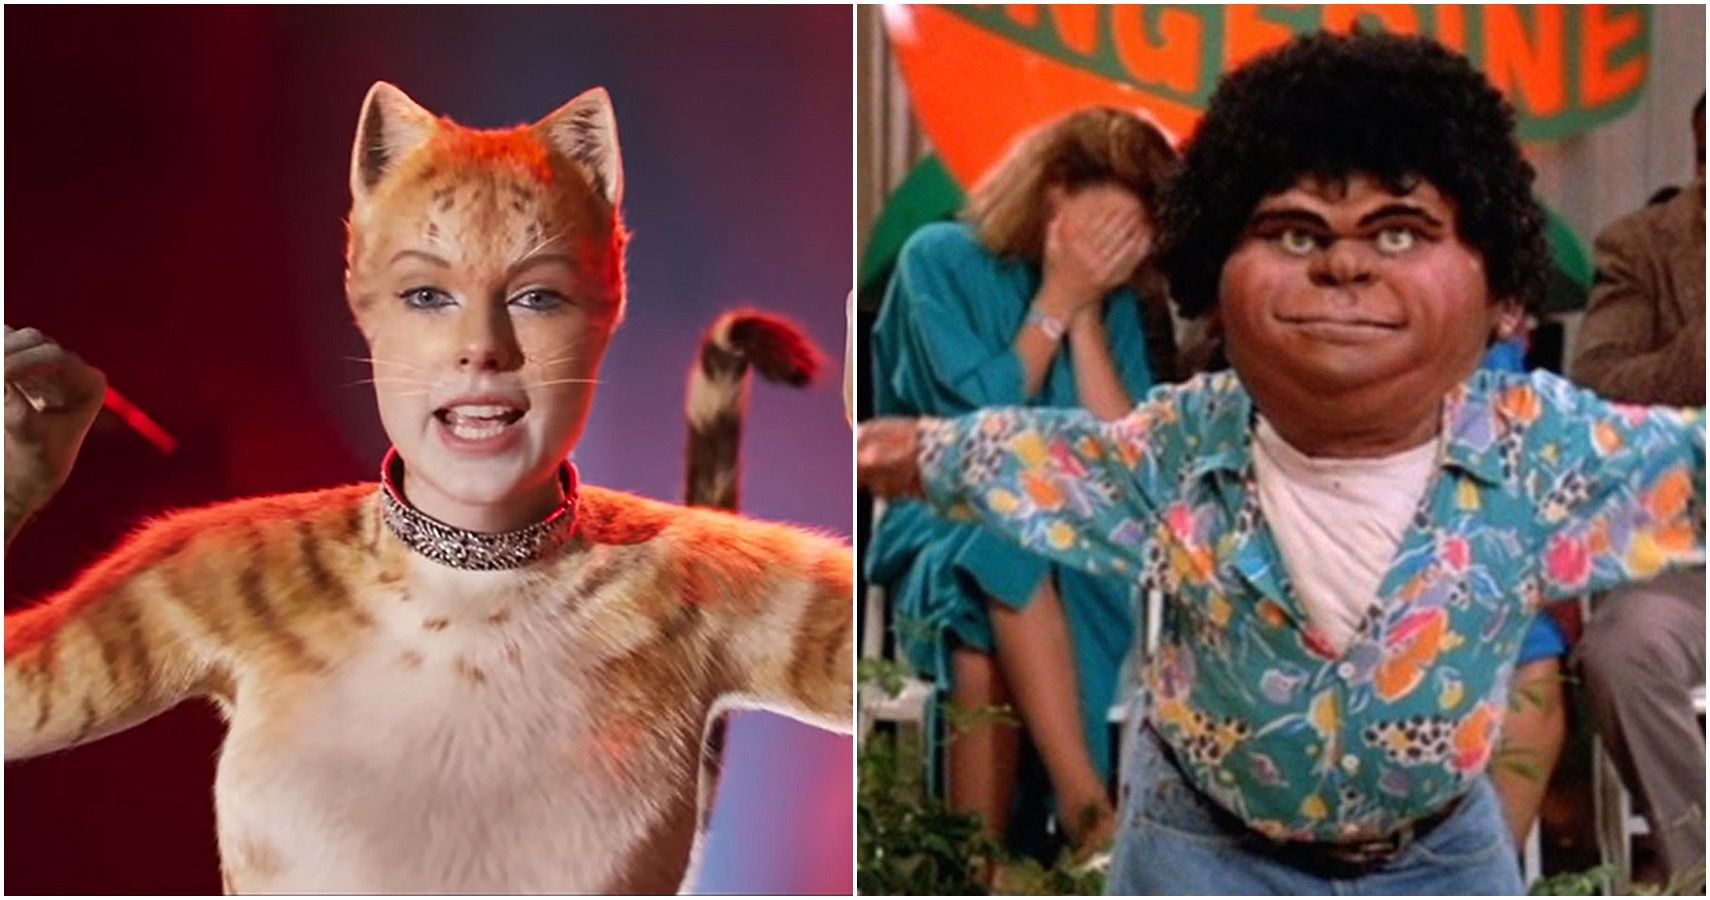 A promotional image featuring images from Cats and The Garbage Pail Kids Movie.